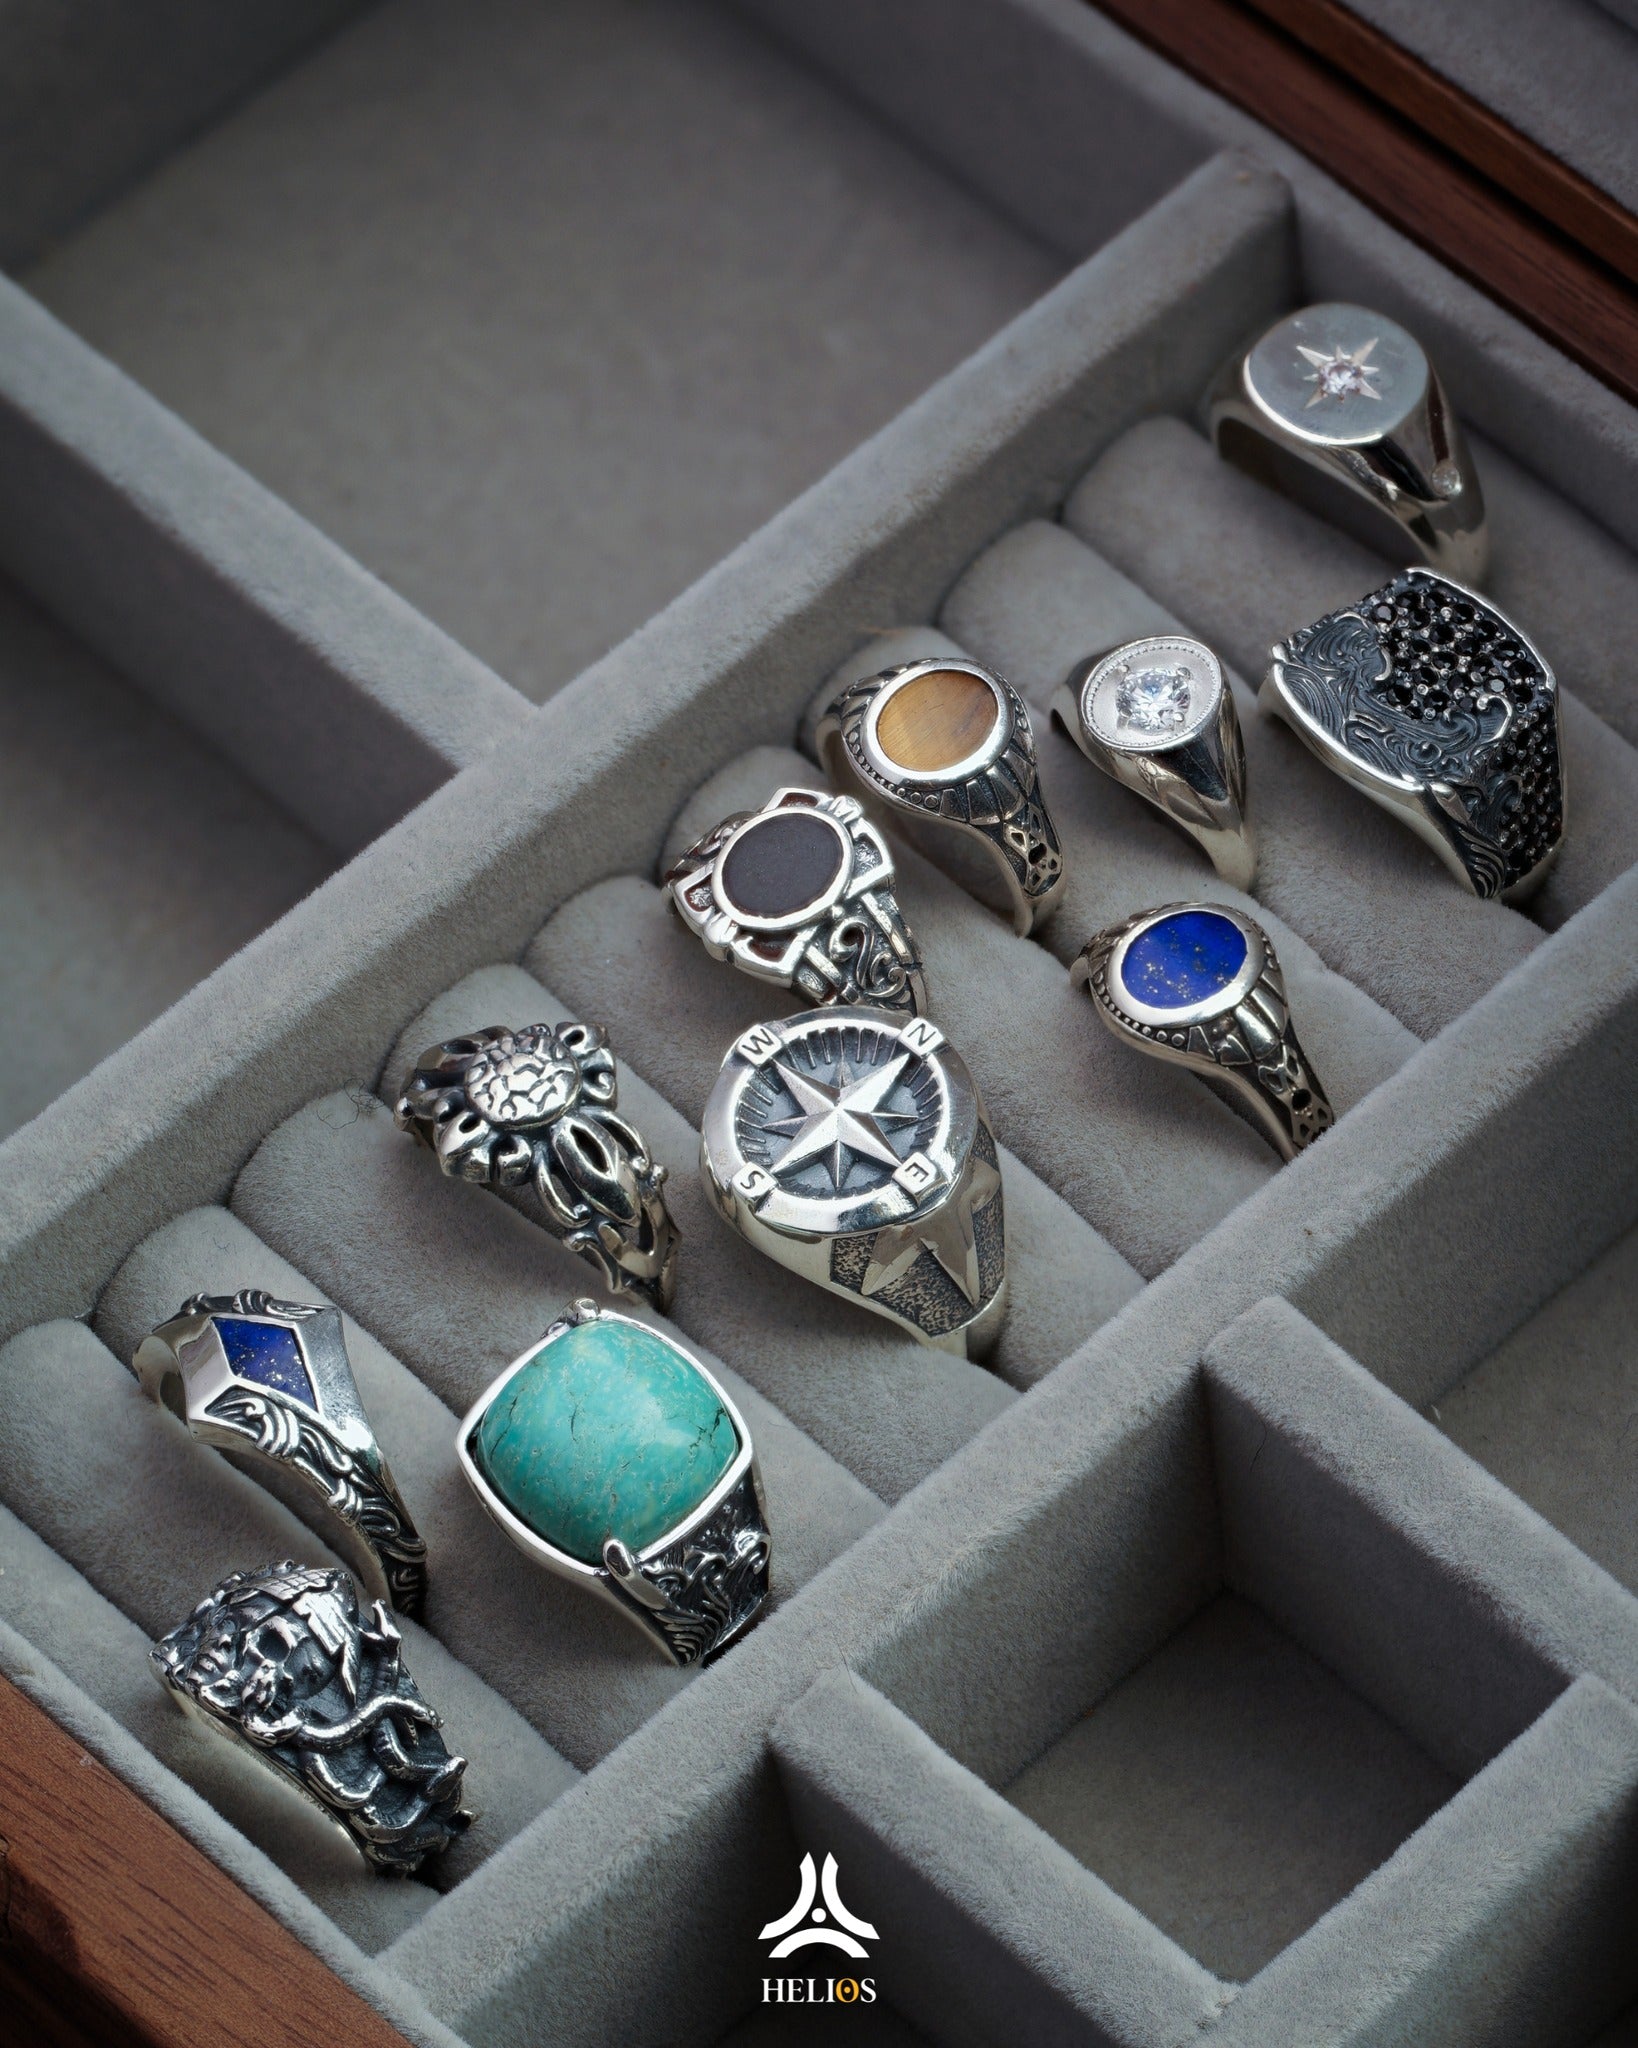 What Occasions are Suitable for Gifting Men's Silver Rings?